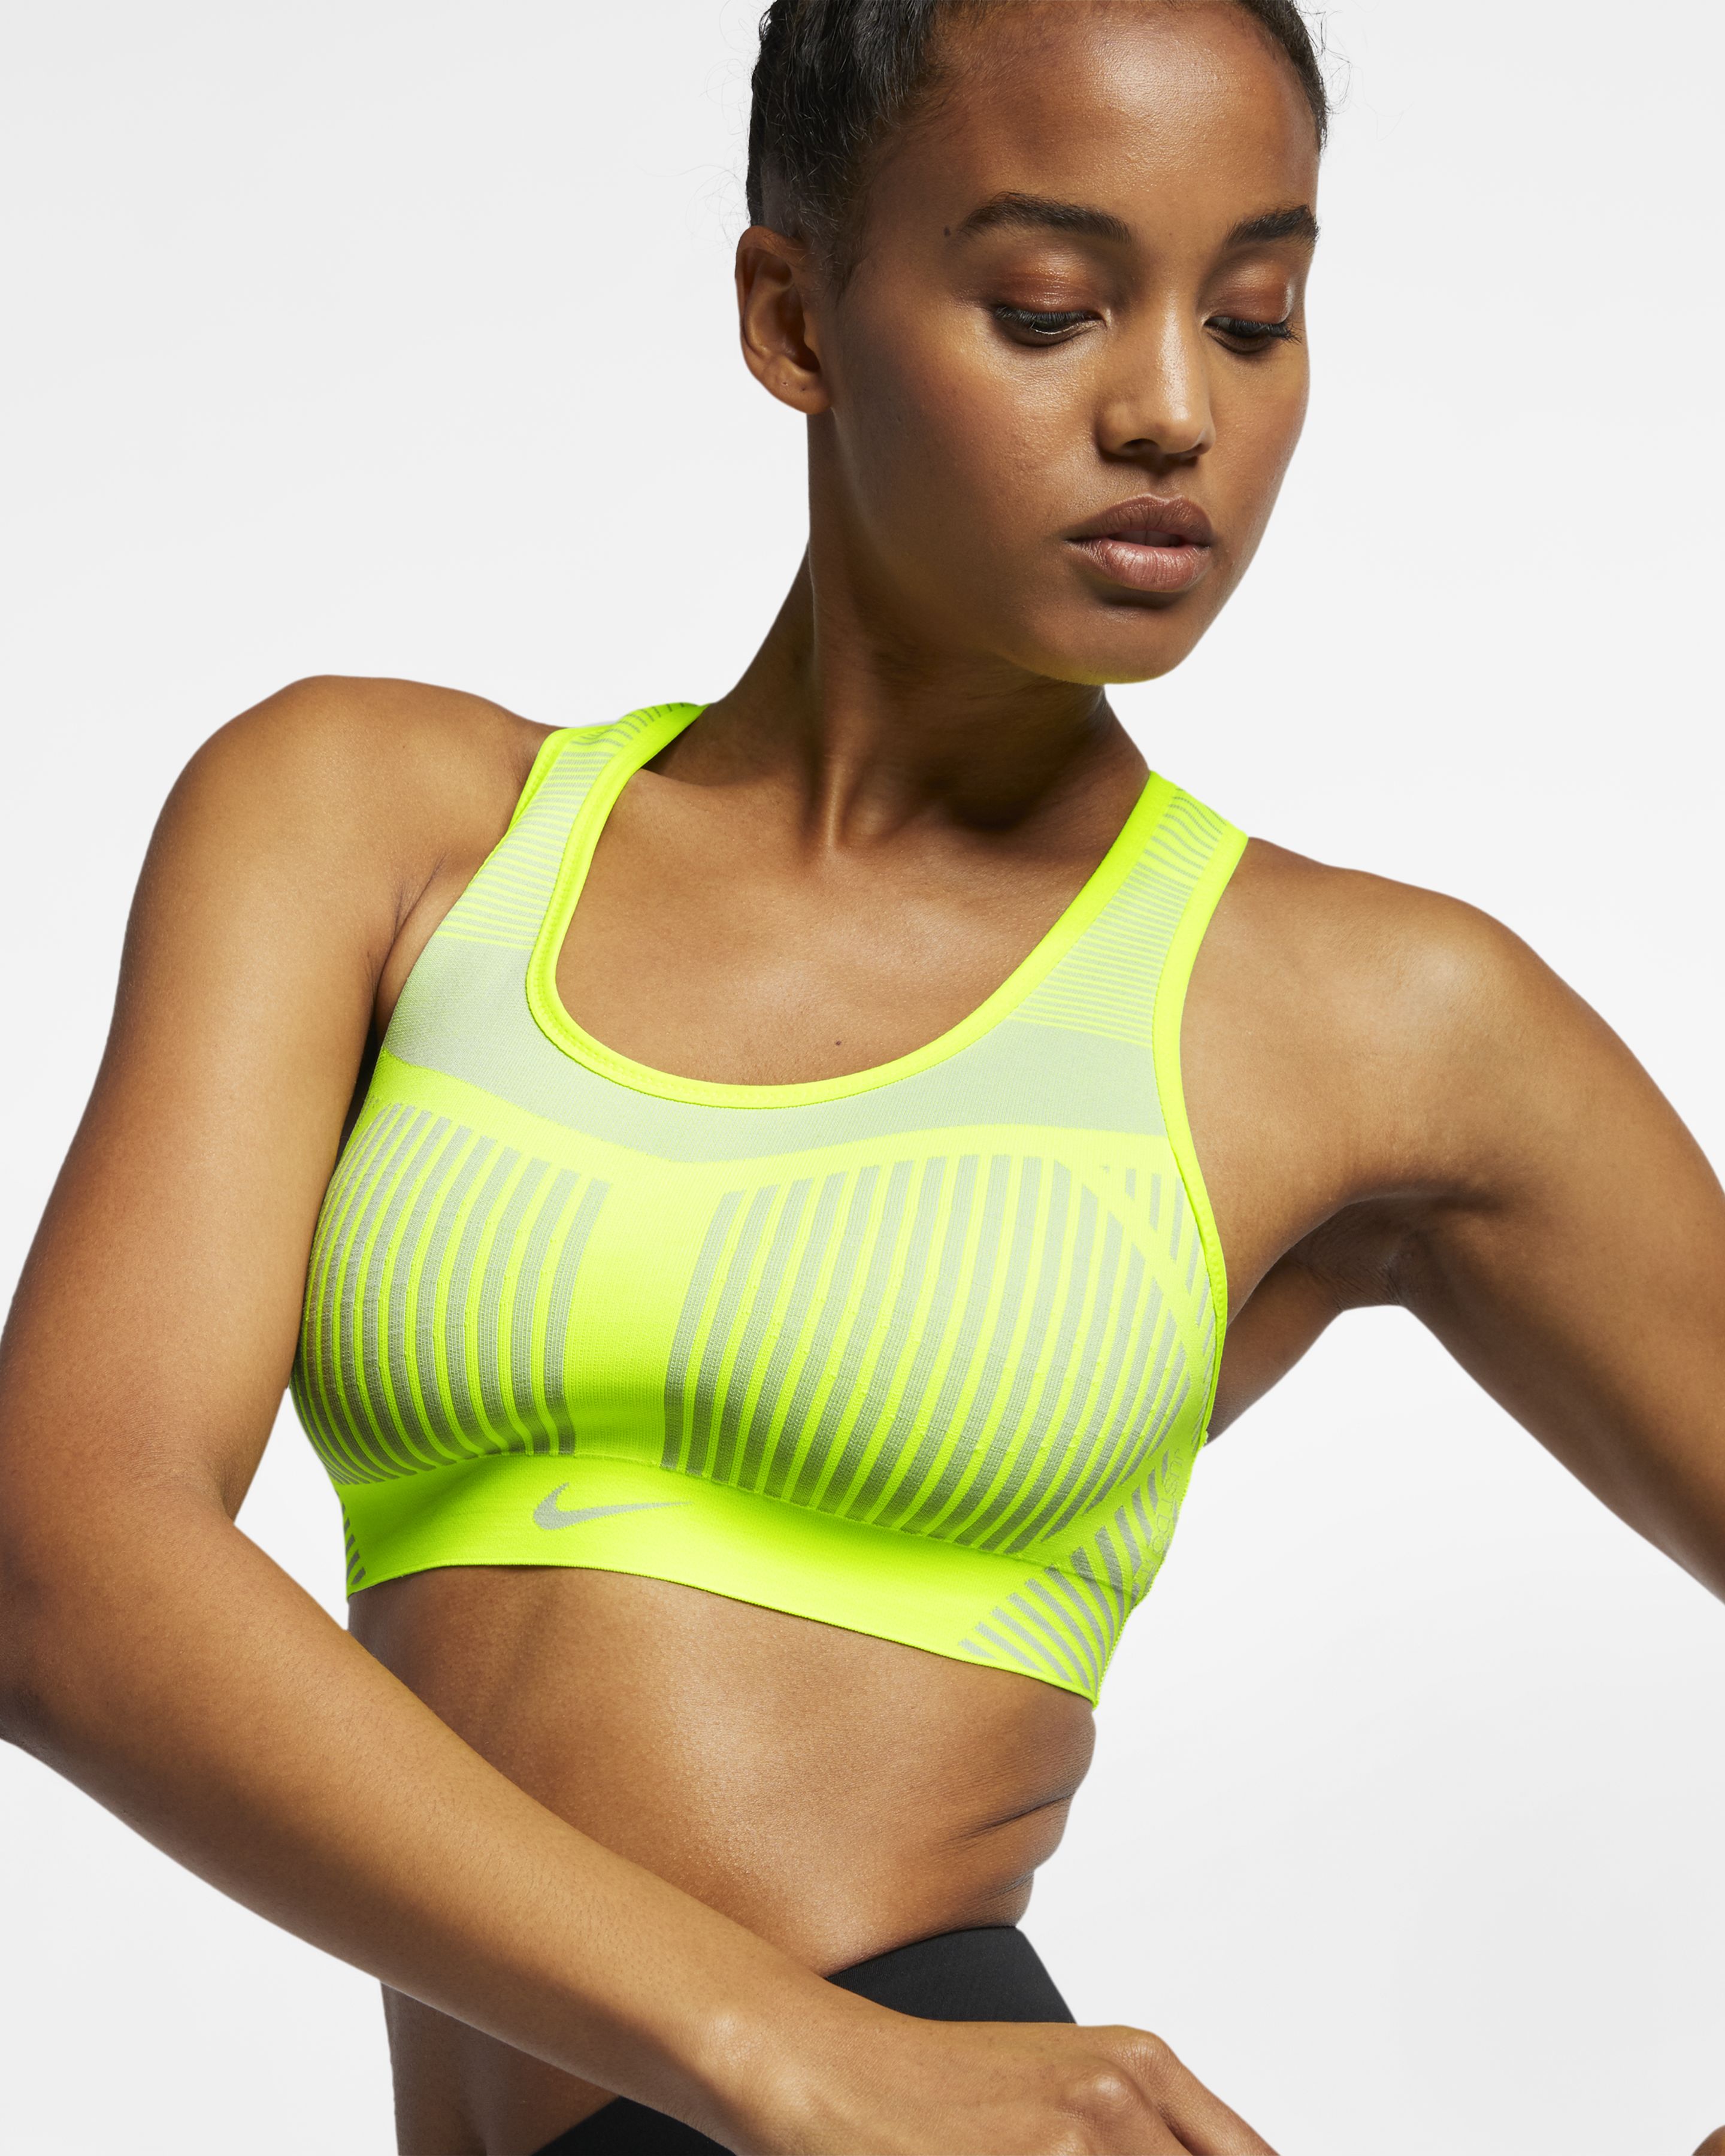 Achieve Your Fitness Goals with the Panache Sport - Bras and Body Image